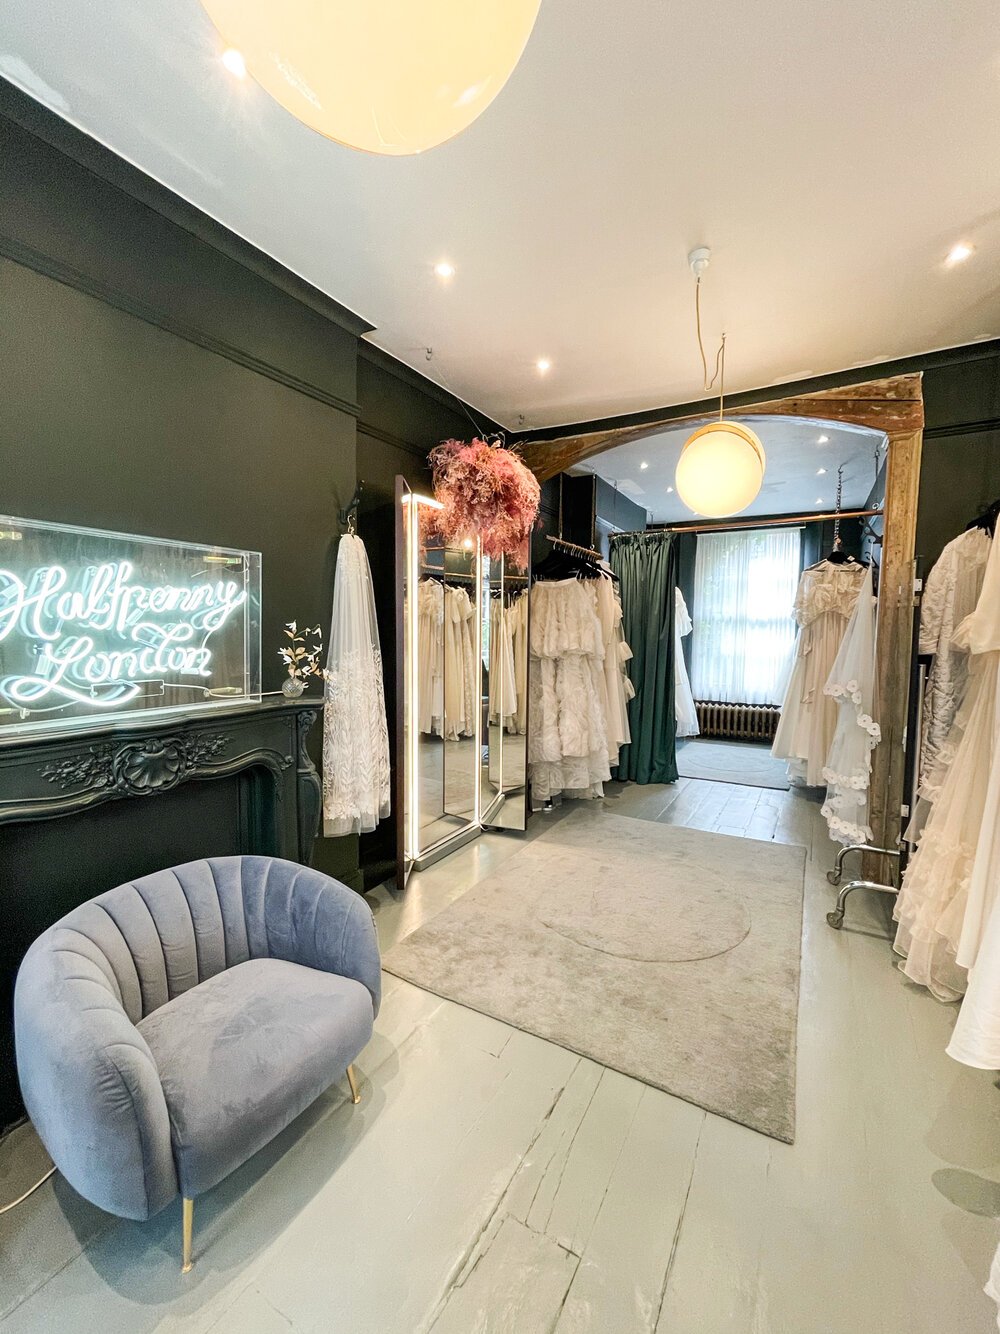 Planning to visit the boutique or atelier after 19th July? Here's what to  expect — Halfpenny London Wedding dresses and separates in London